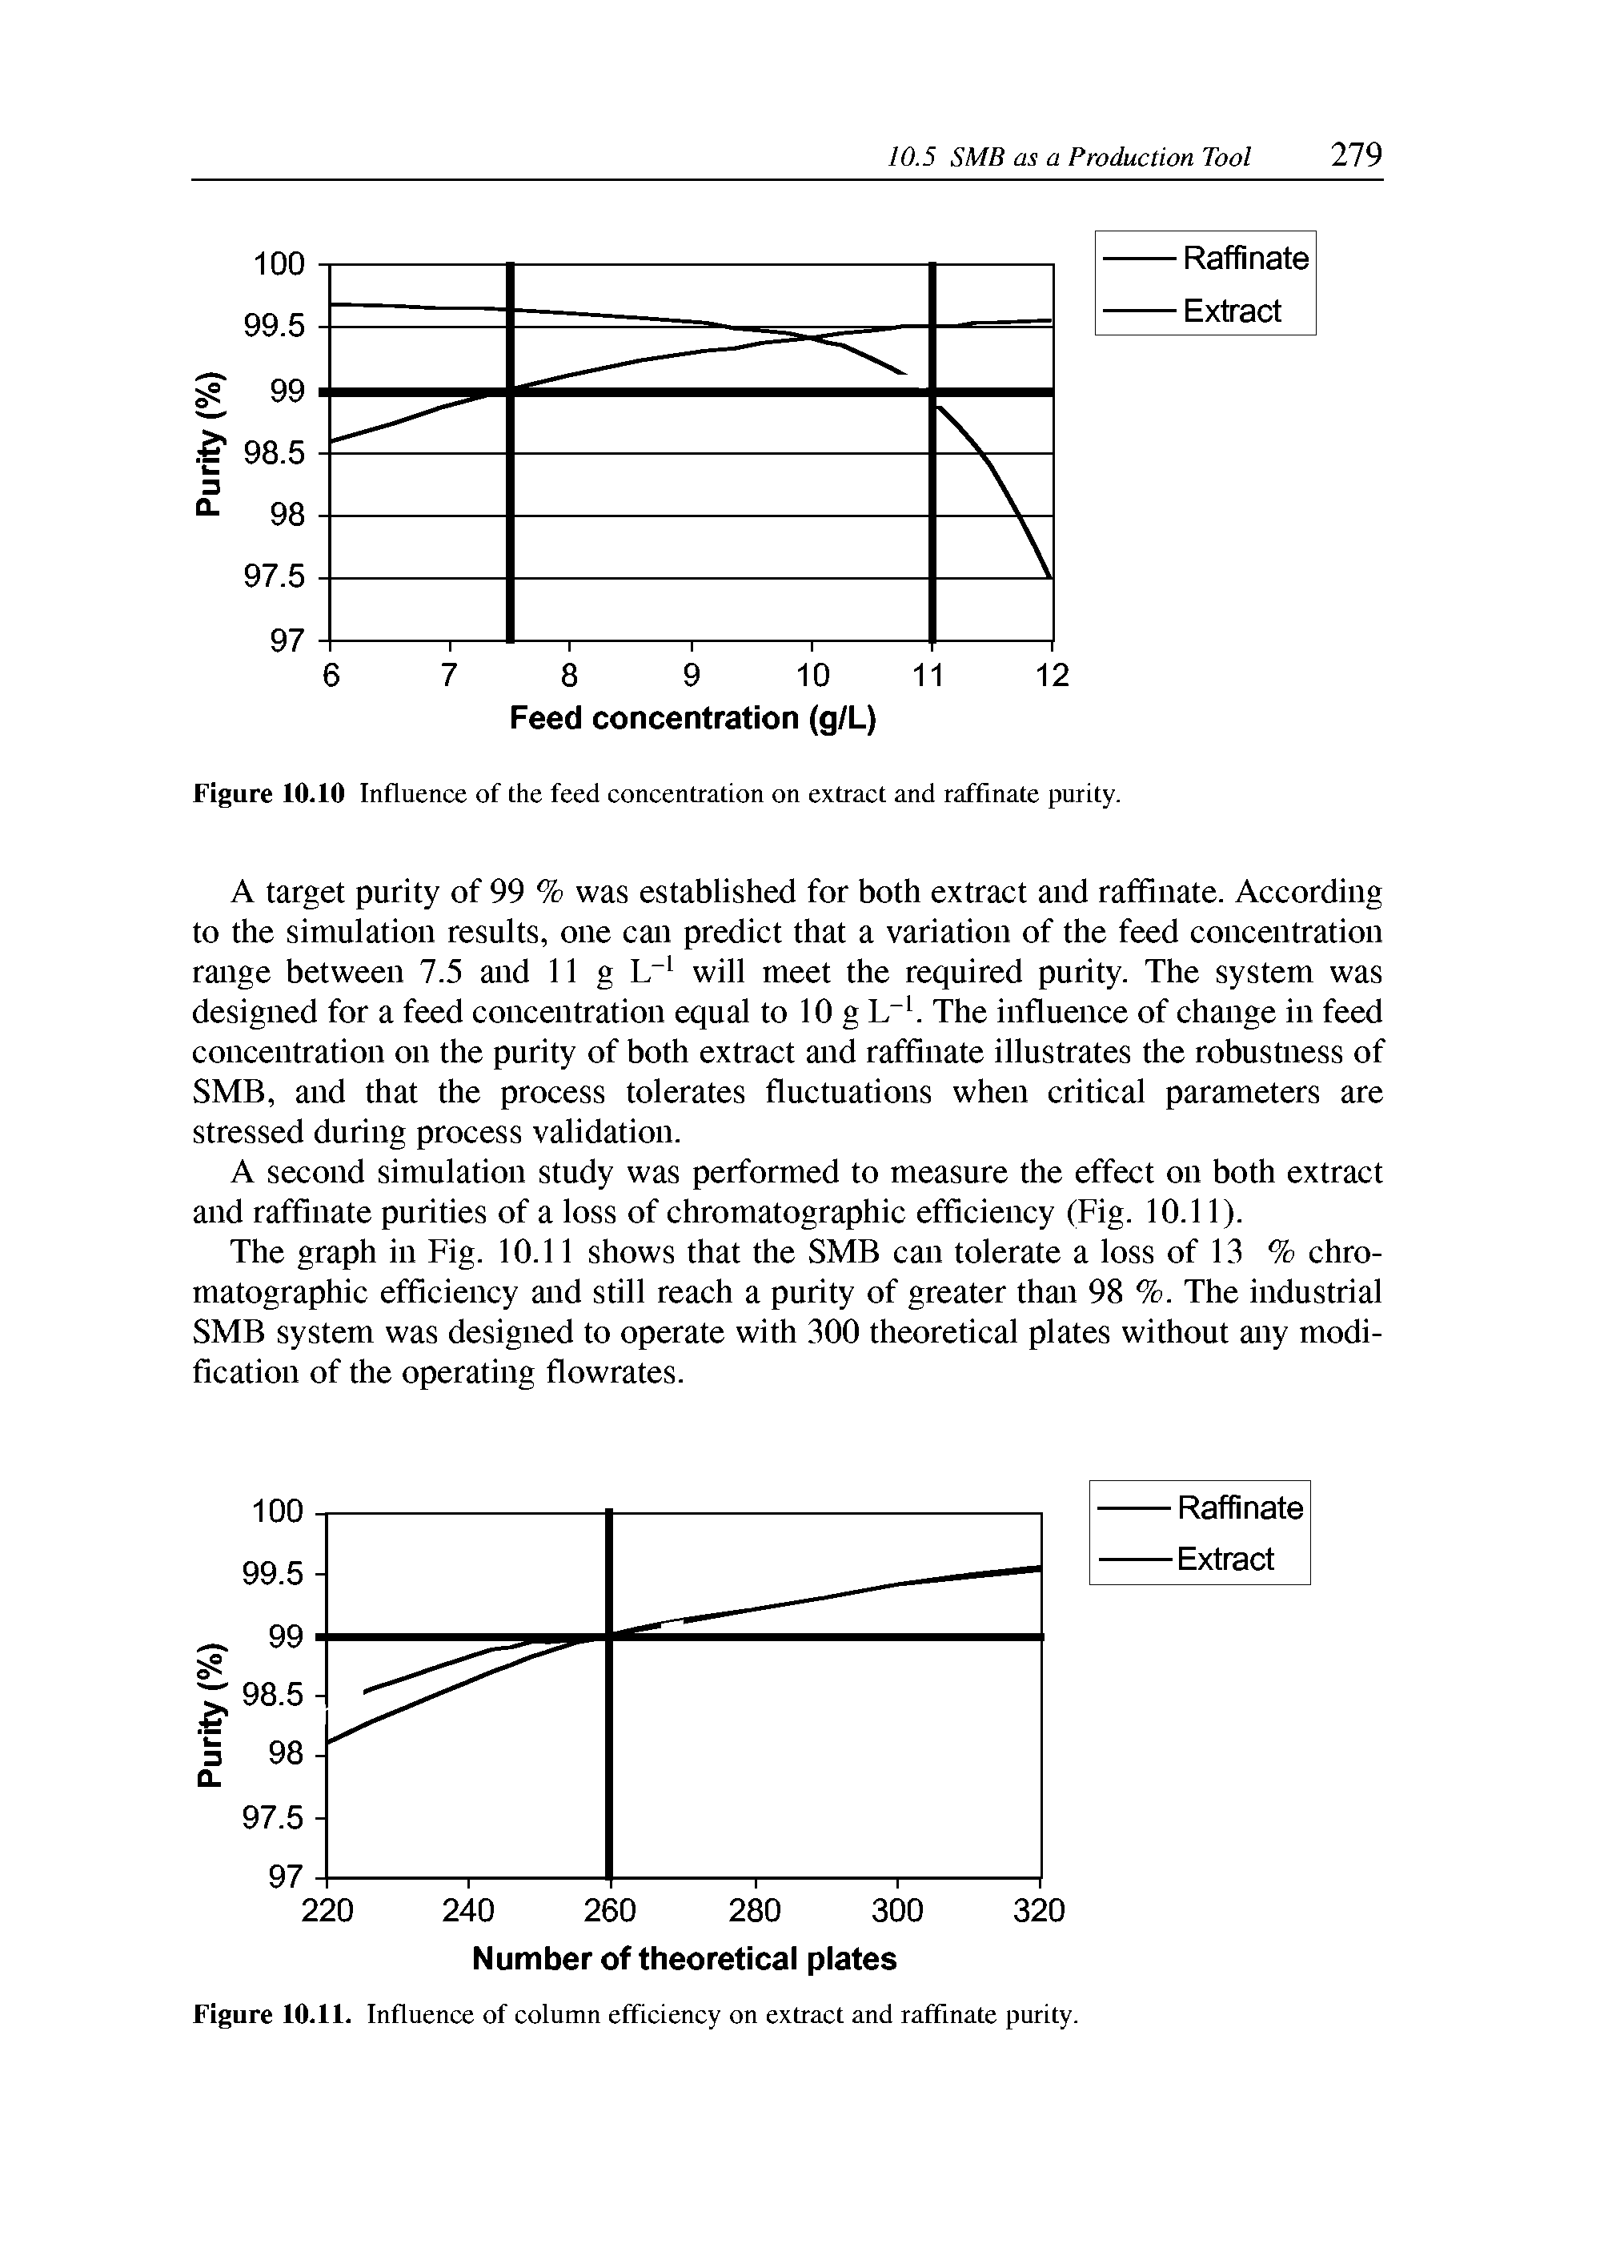 Figure 10.10 Influence of the feed concentration on extract and raffinate purity.